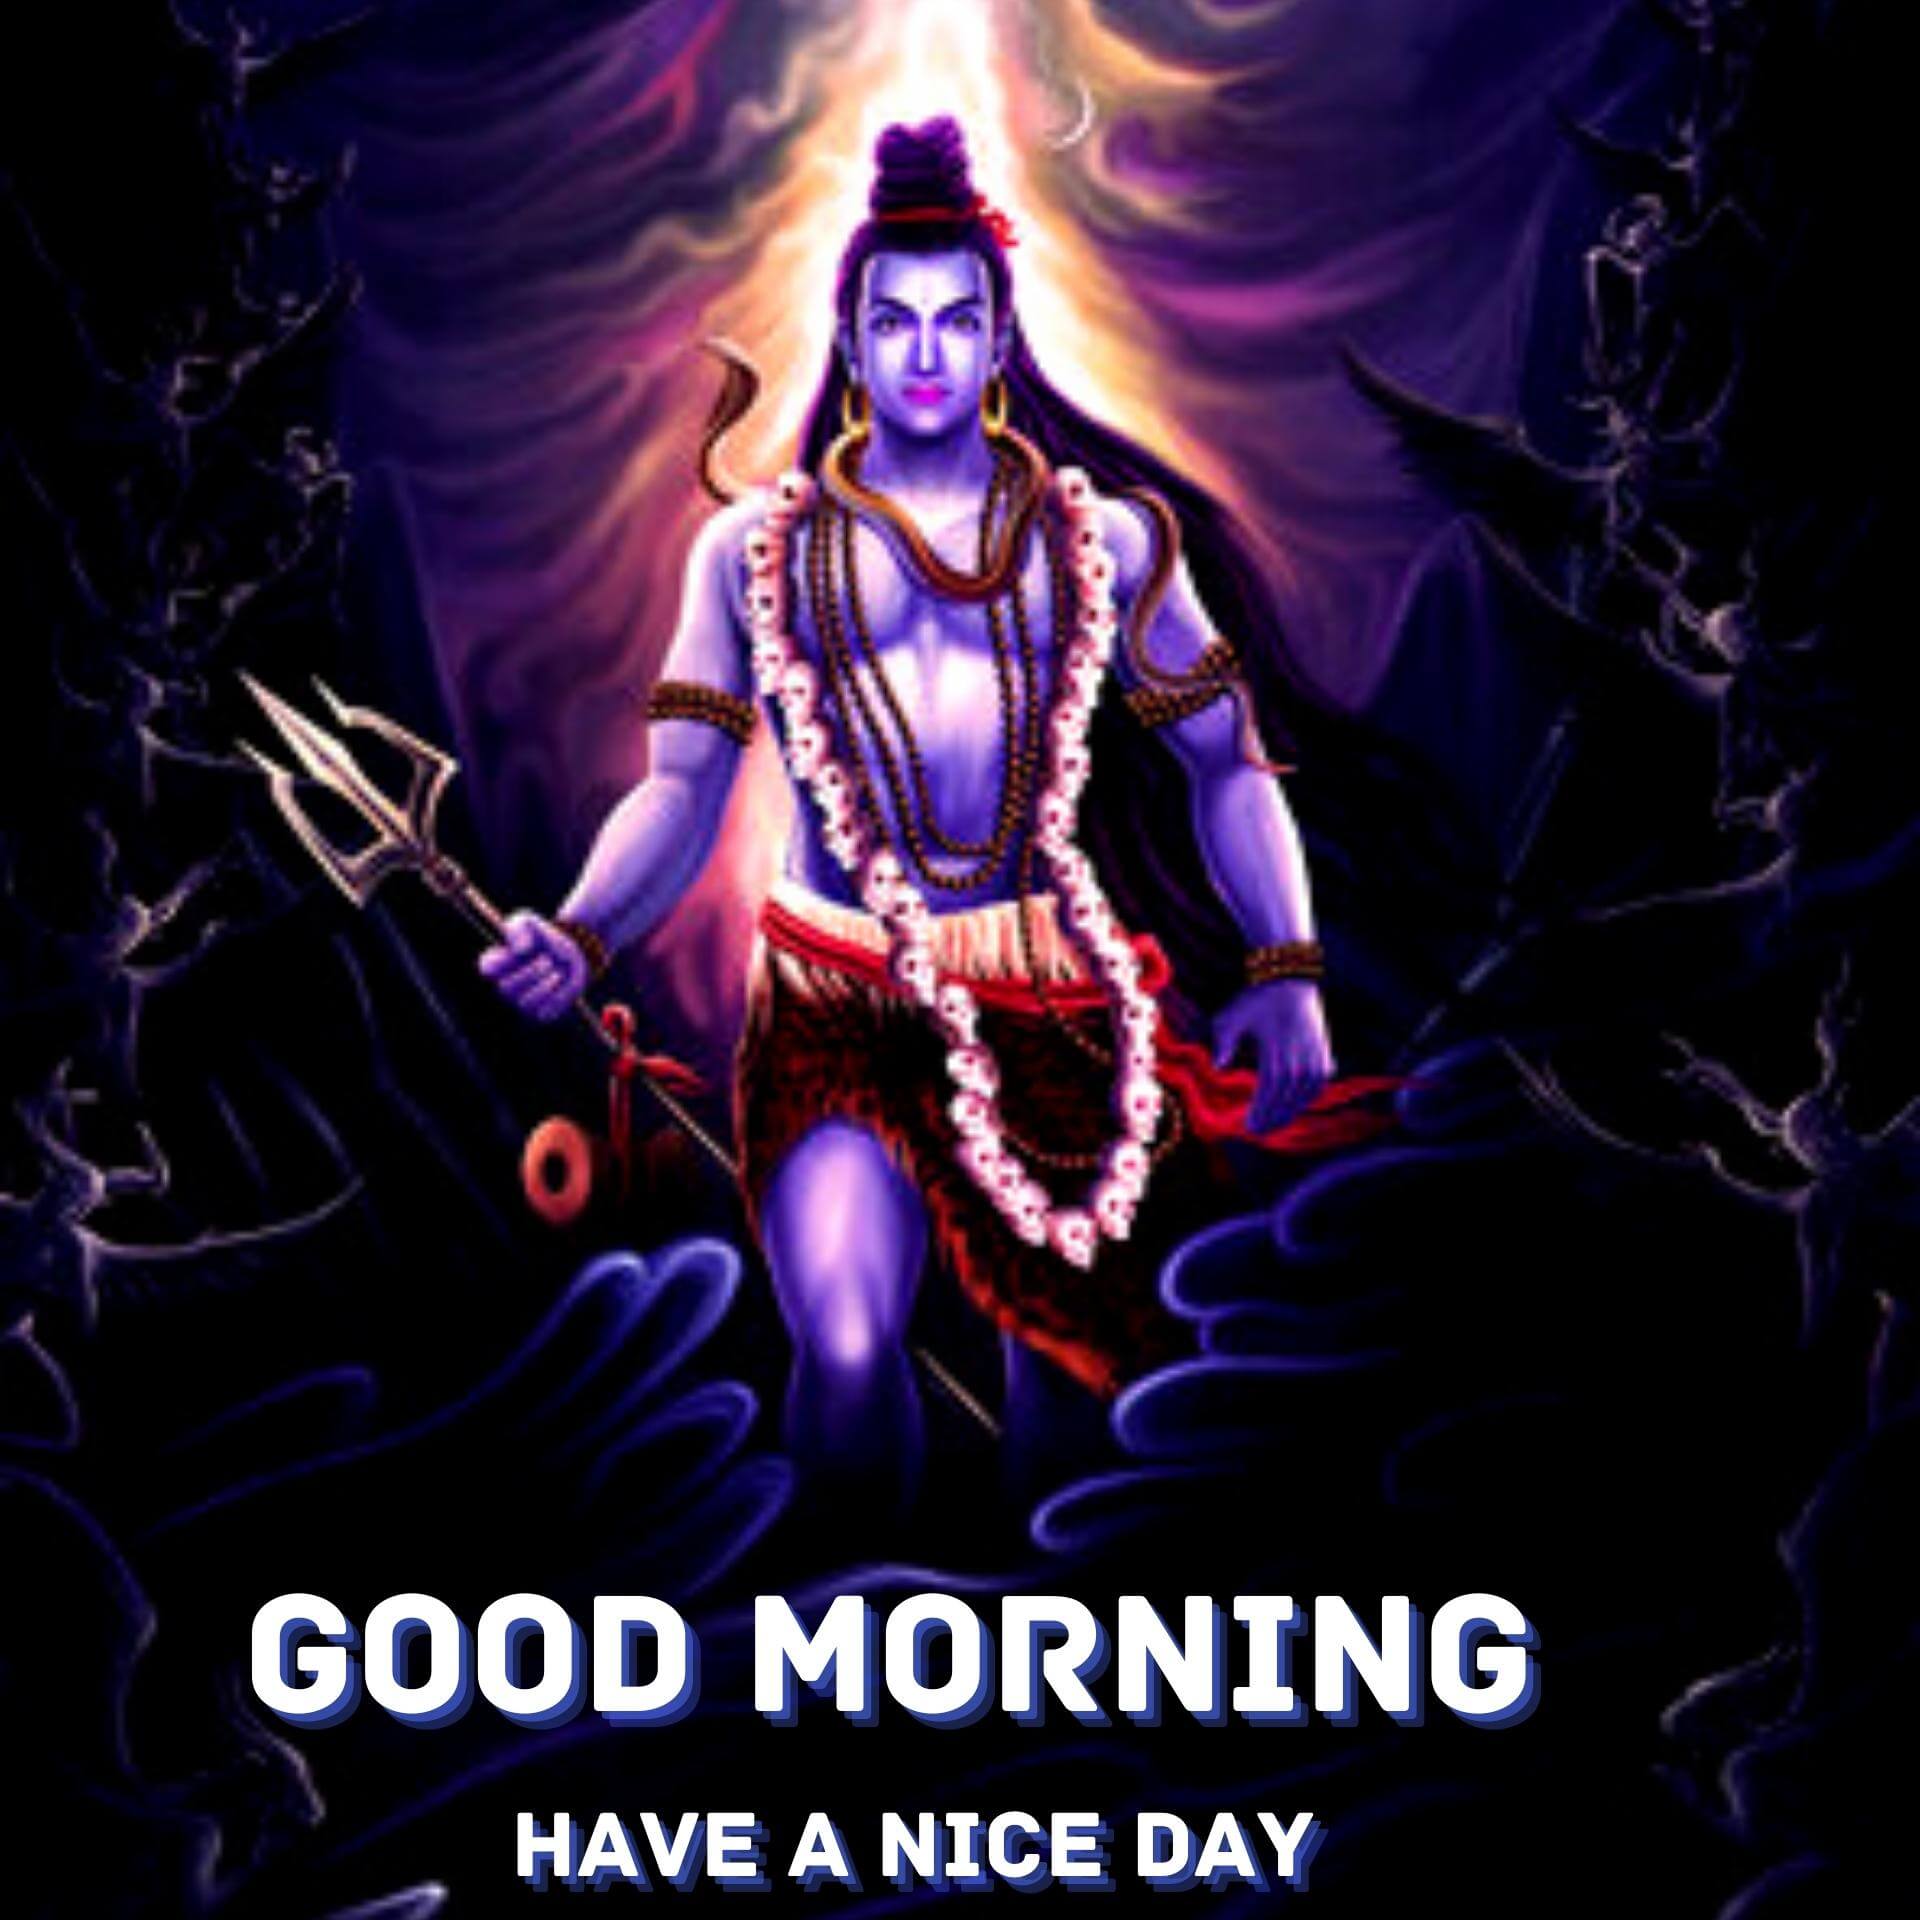 New Free Shiva Good Morning Images Download